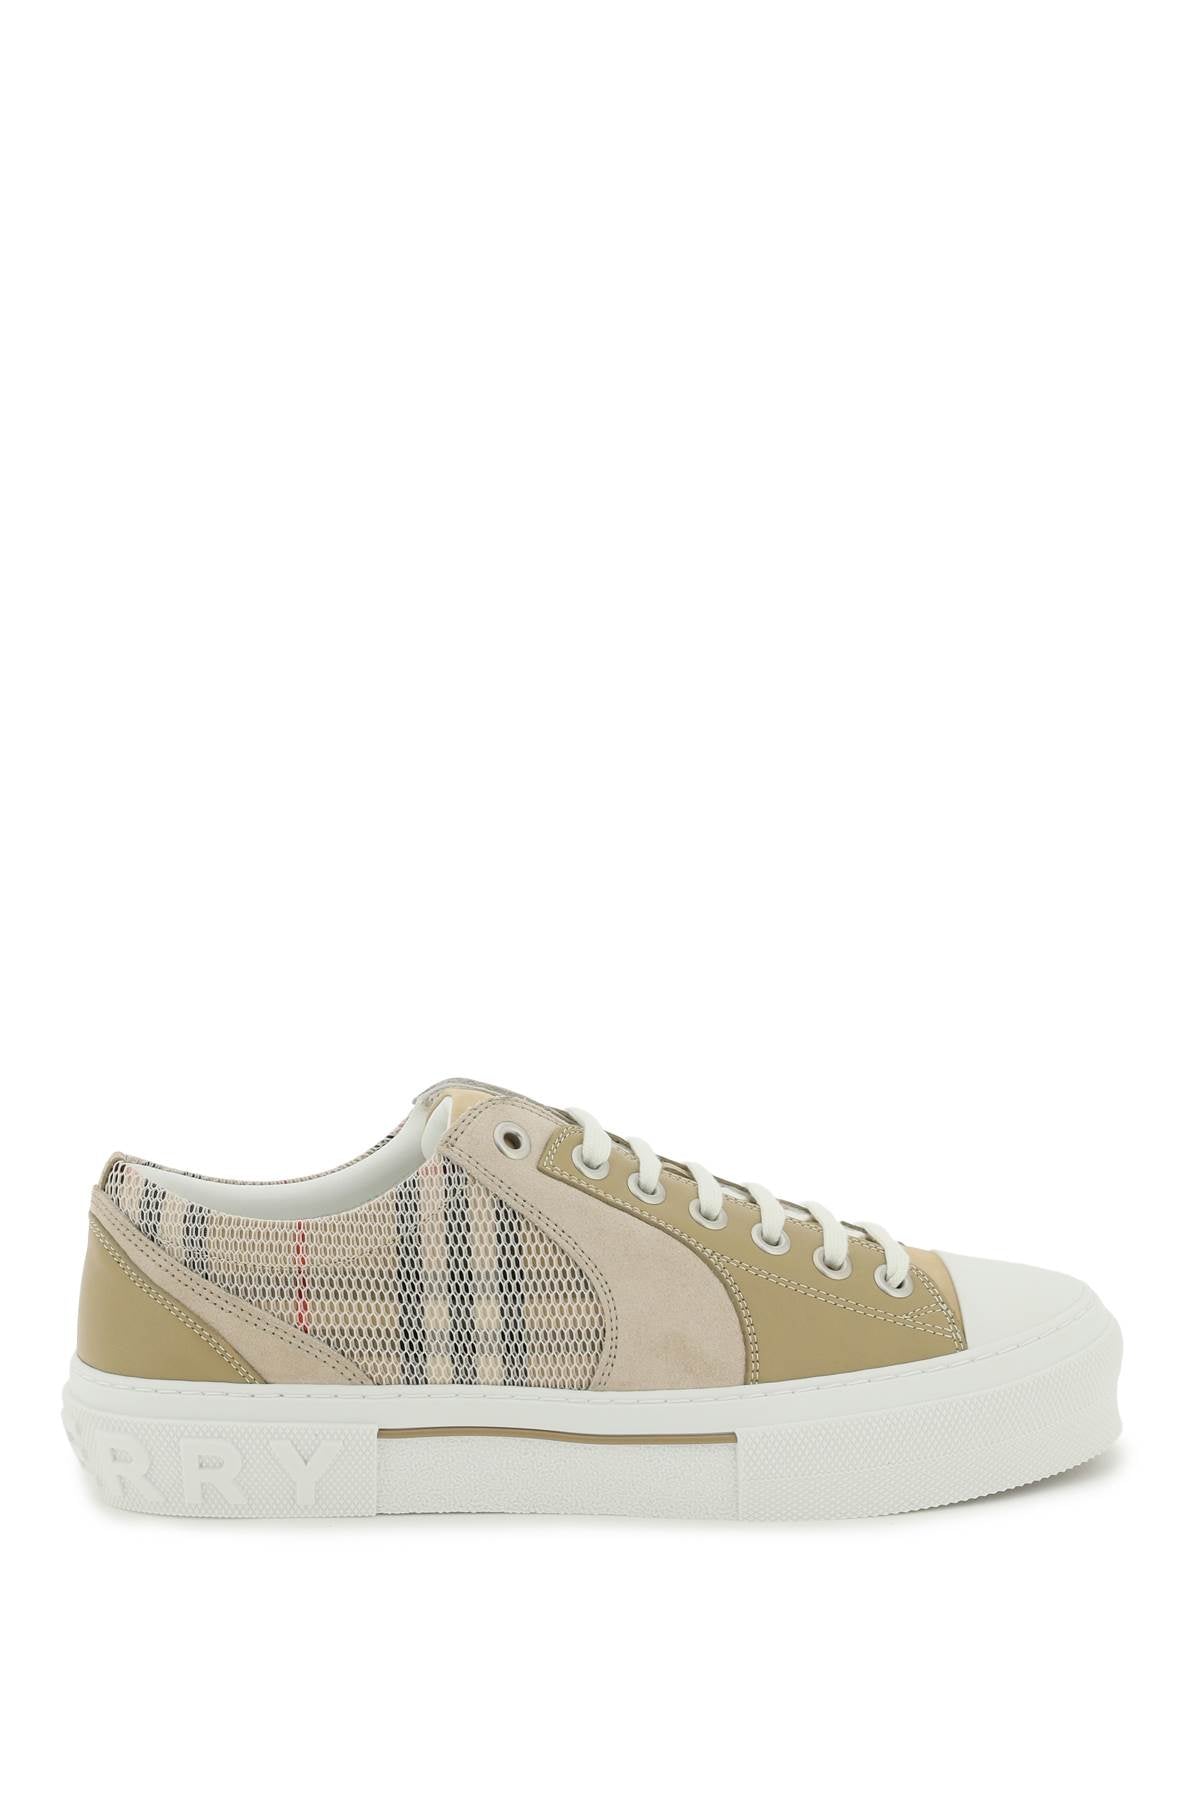 Burberry Vintage Check &Amp, Leather Sneakers   Beige